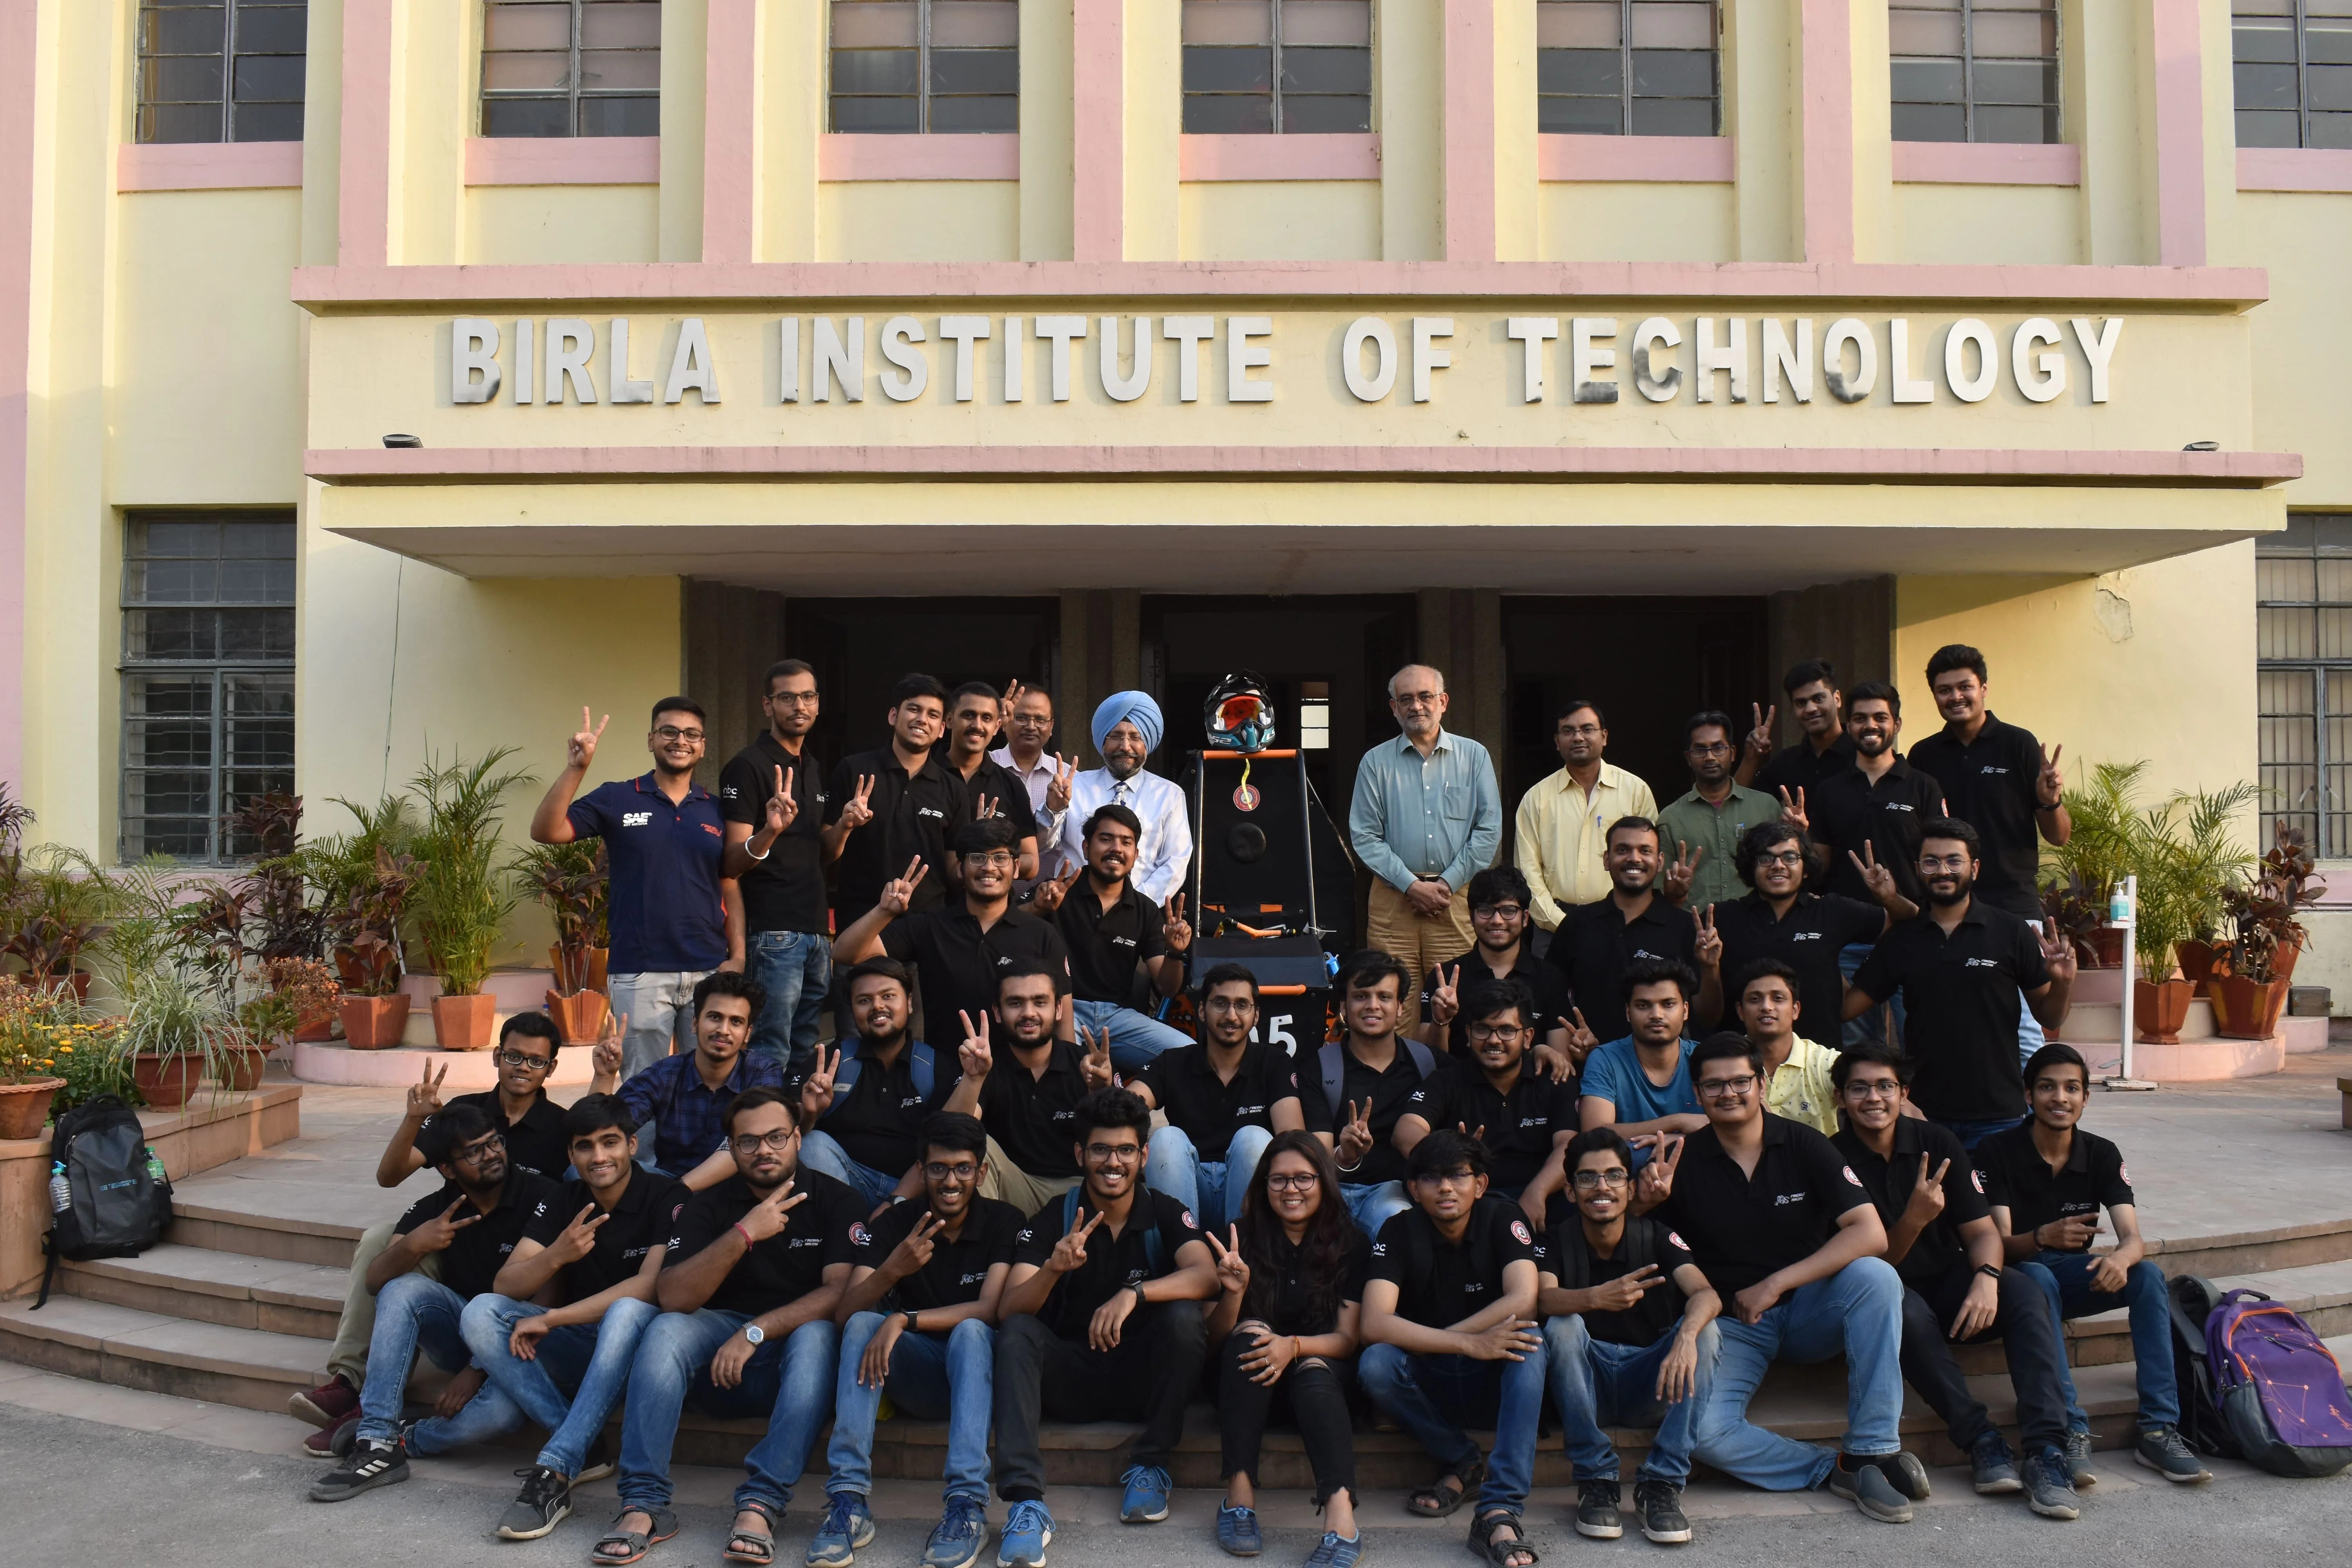 Team Firebolt with VC Indranil Manna and other professors at Birla Institute of Technology, Mesra